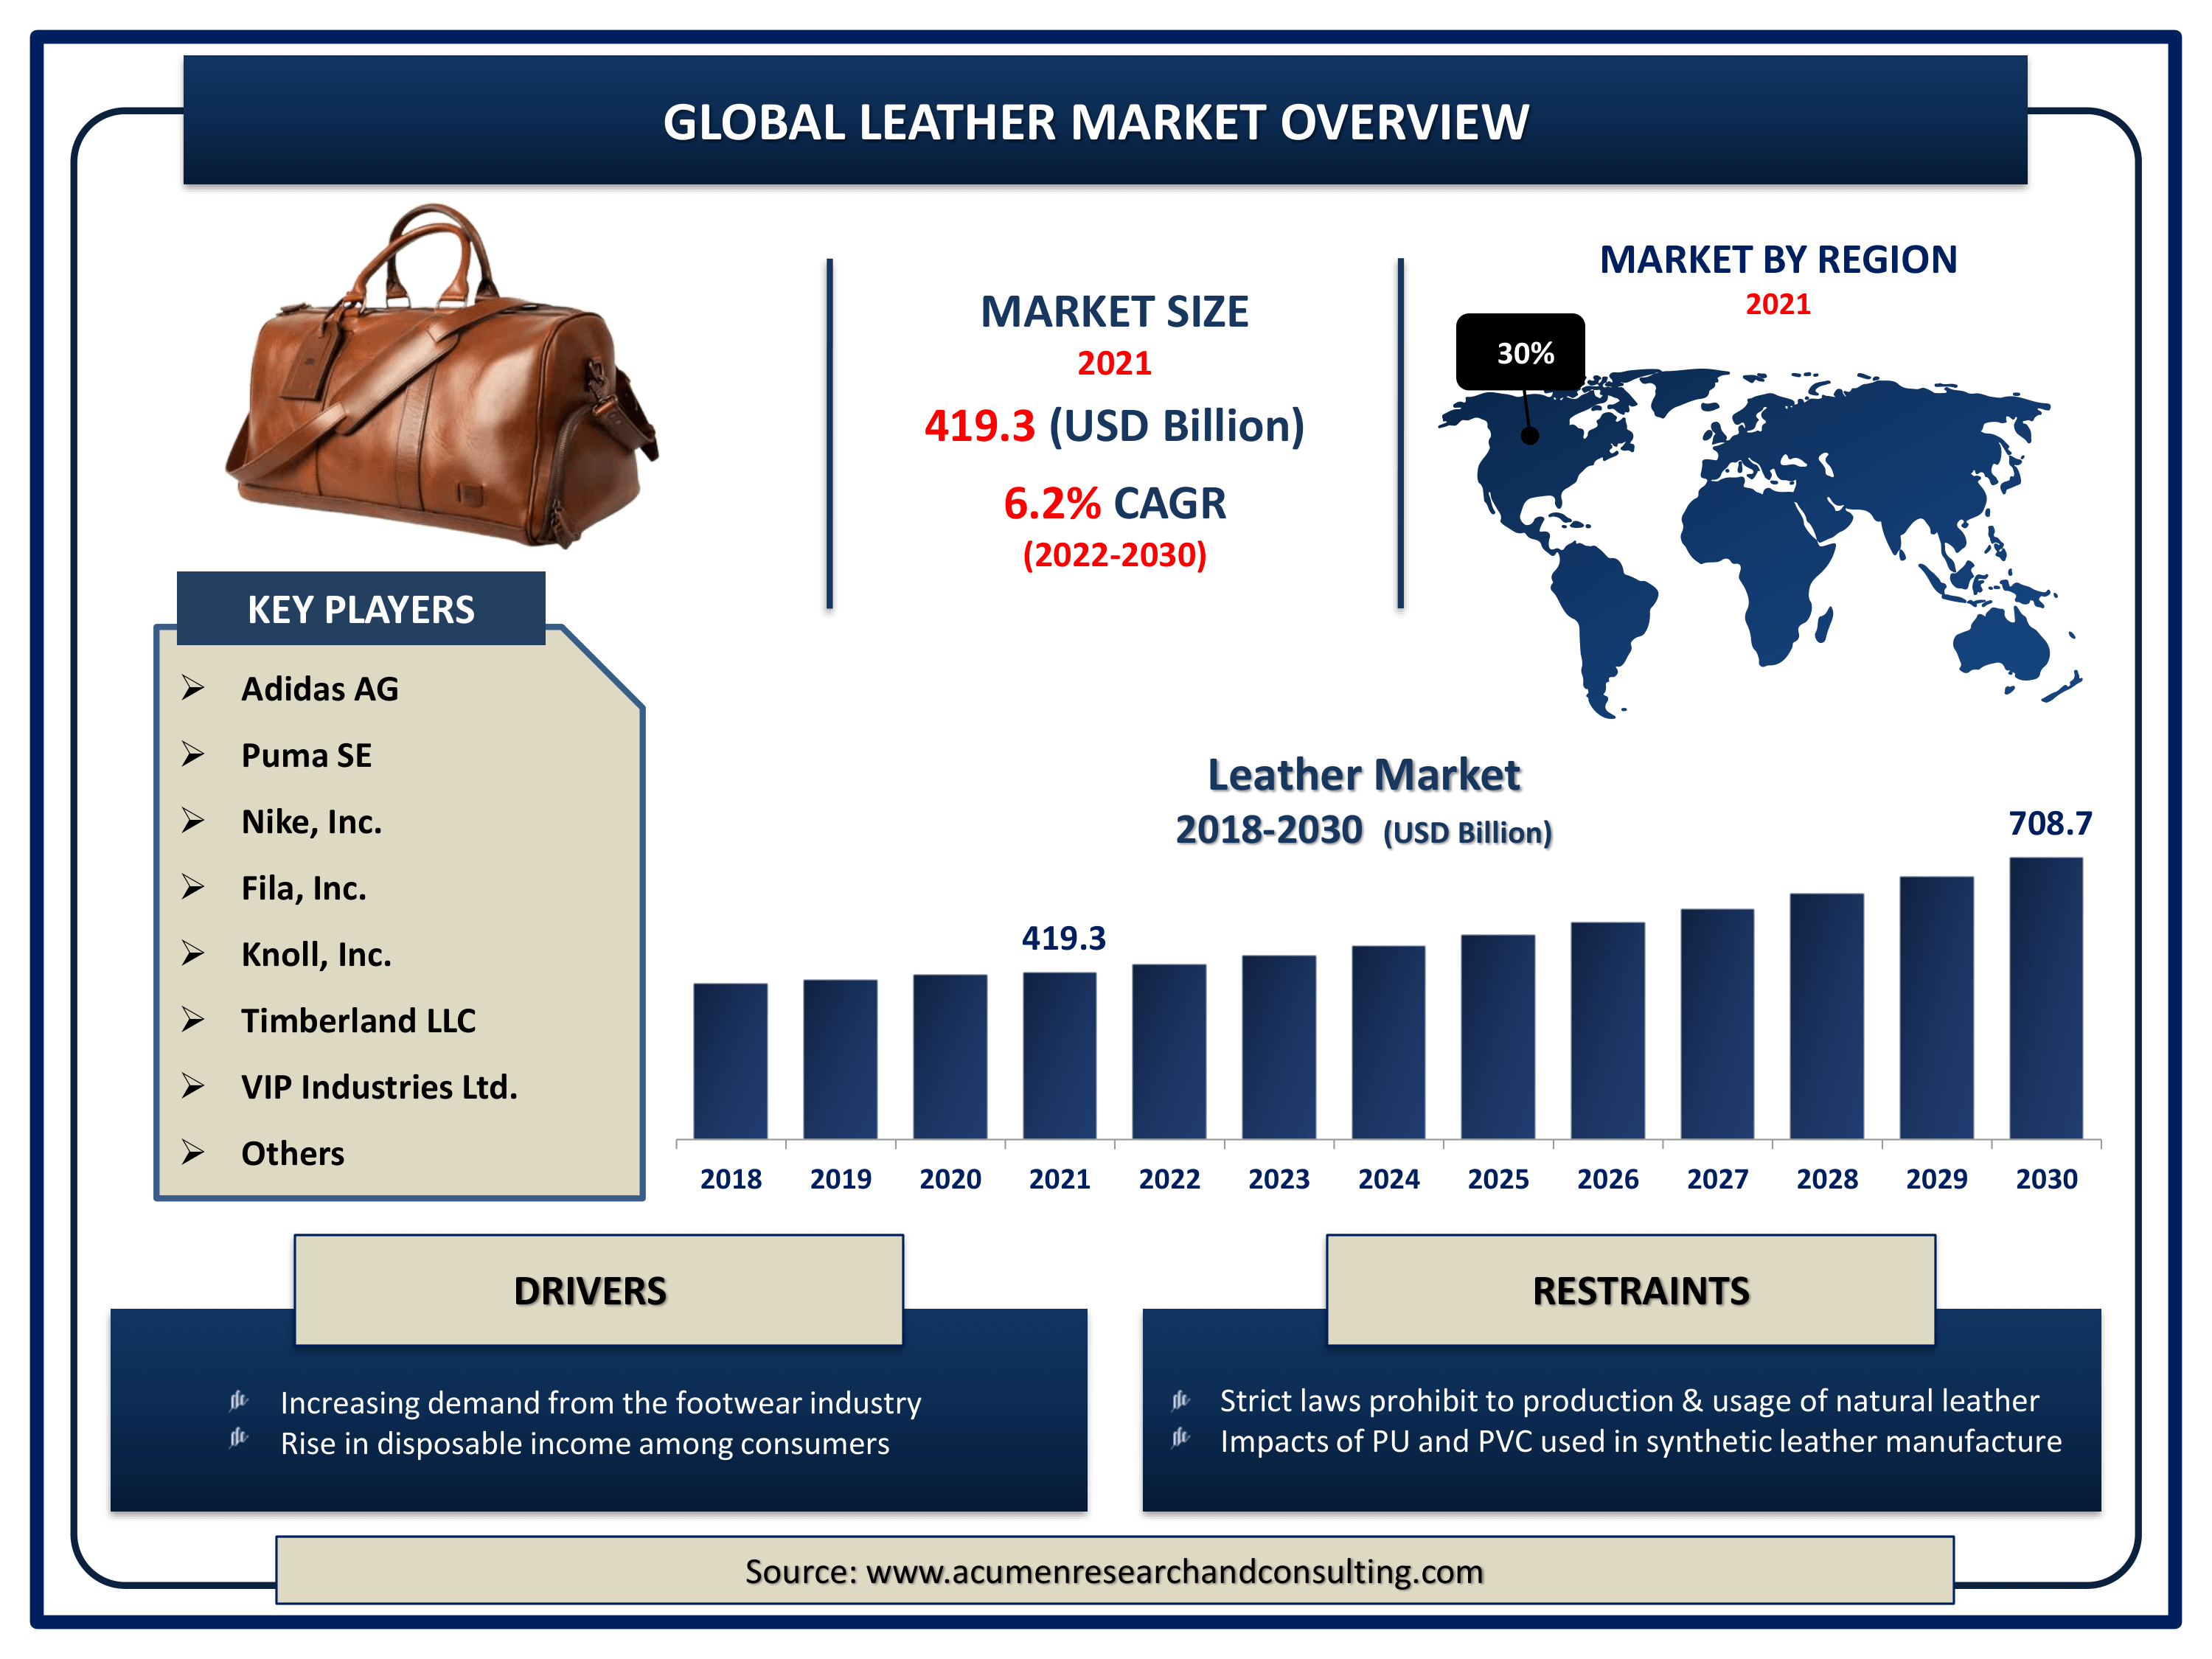 Global leather market revenue is estimated to expand by USD 708.7 billion by 2030, with a 6.2% CAGR from 2022 to 2030.